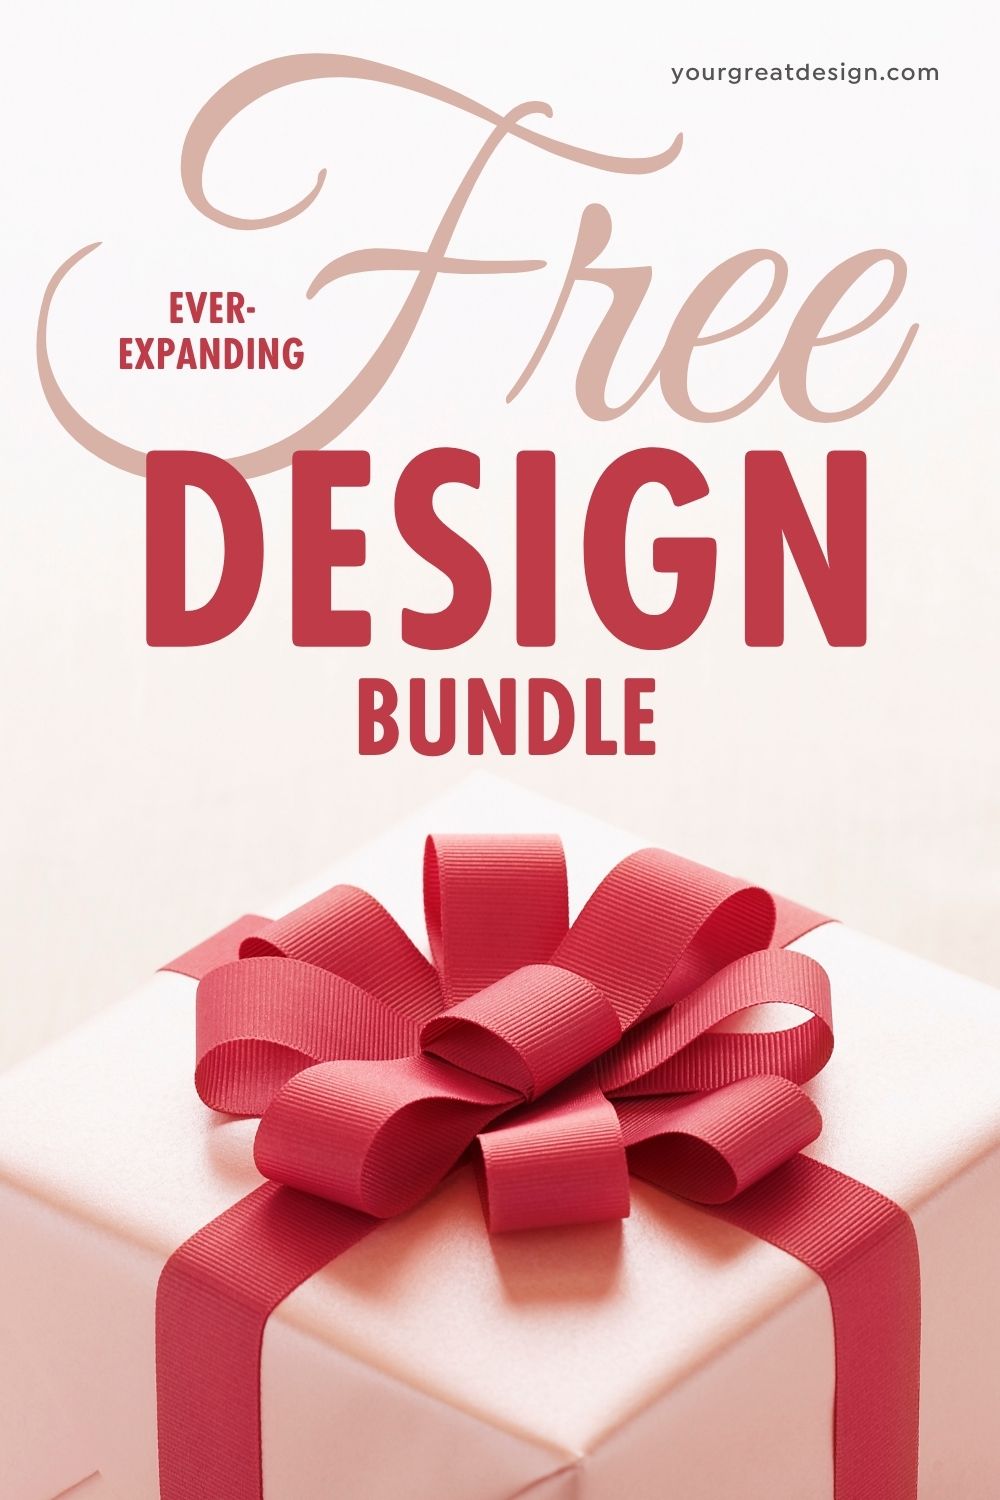 Free Digital Design Bundle With 30 Items Commercially Available Fonts Procreate Brushes Textures Effects Mockup7 